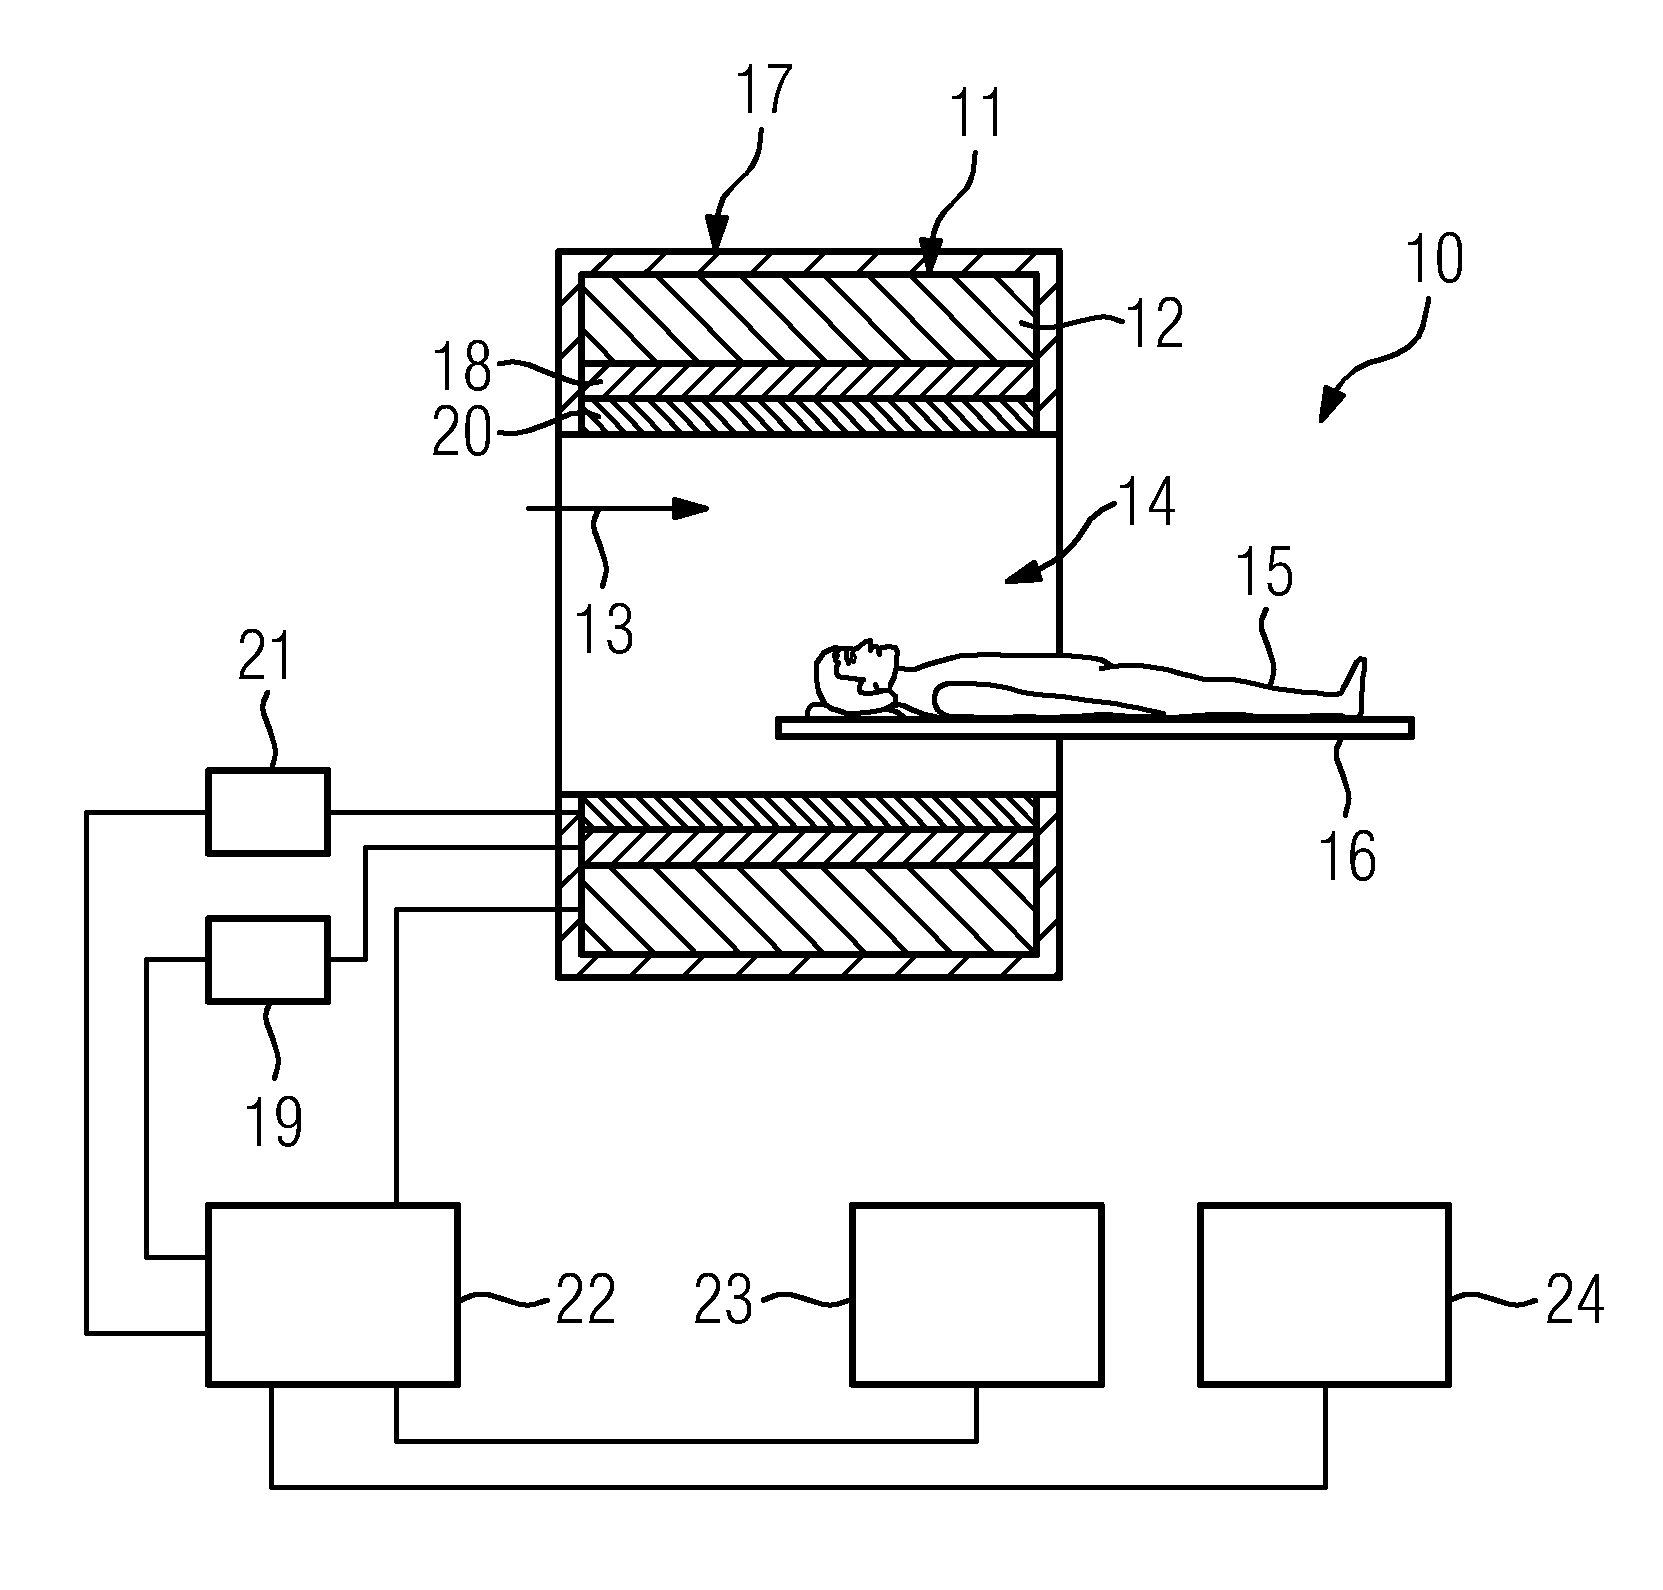 Magnetic resonance apparatus with a noise prevention element and a mold apparatus for producing the noise prevention element